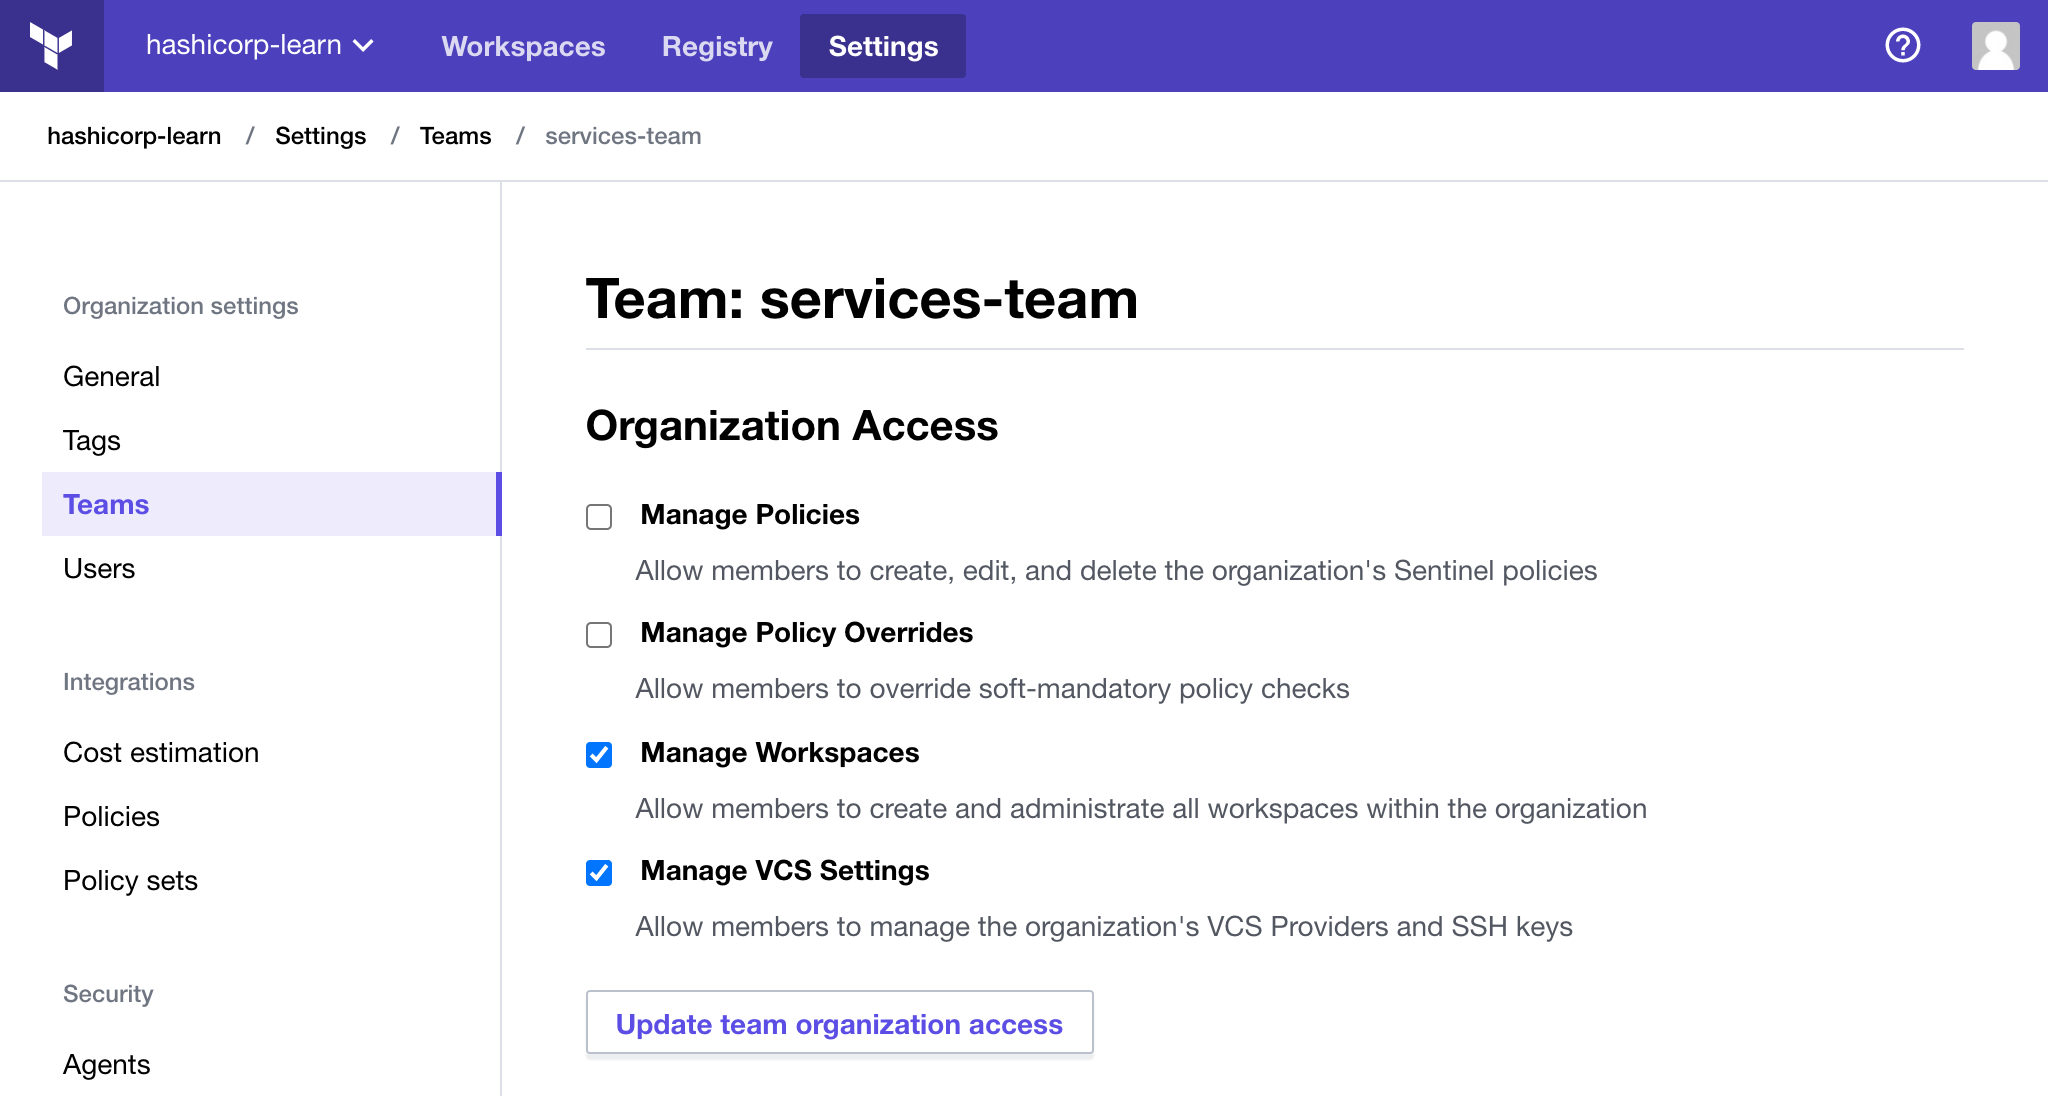 Services team settings page. The services team can manage workspaces and VCS settings